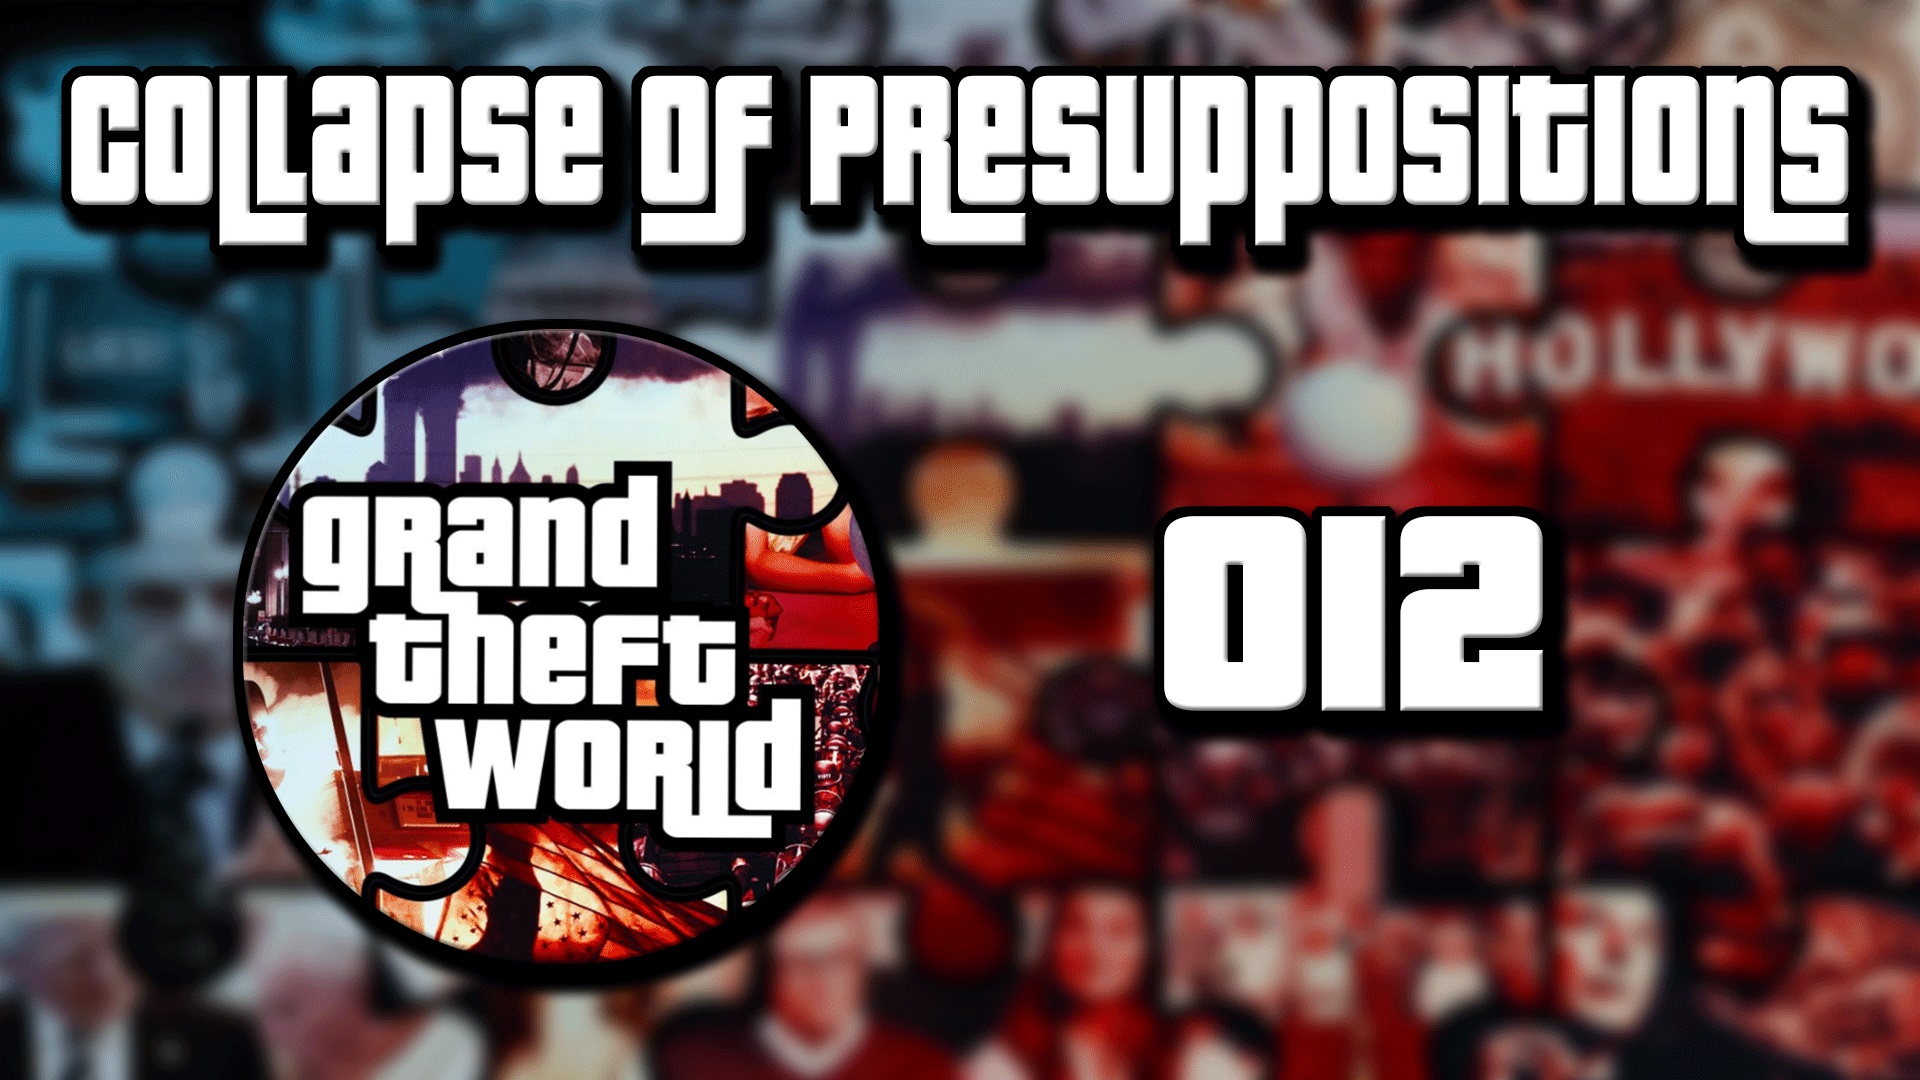 Grand Theft World Podcast 012 | The Collapse of Presuppositions